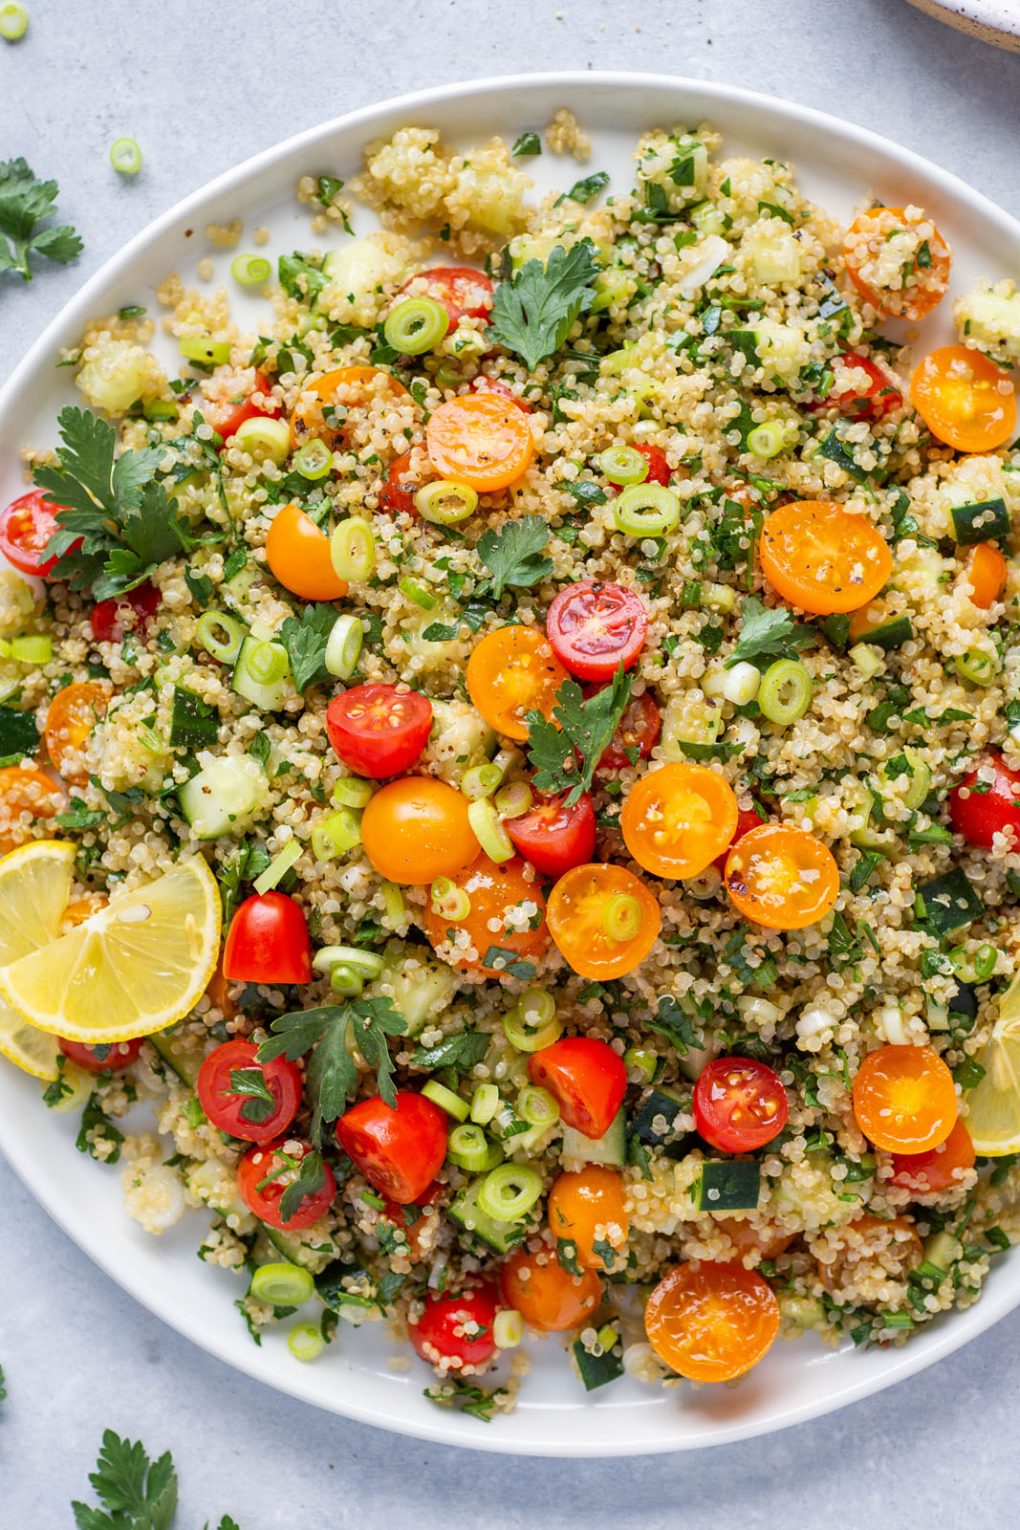 Overhead shot of a large colorful plate of quinoa tabbouleh with red and orange cherry tomatoes, cucumber, parsley, and green onions. Garnished with a few lemon wedges on a light colored background surrounded by some scattered herbs and cherry tomatoes. 